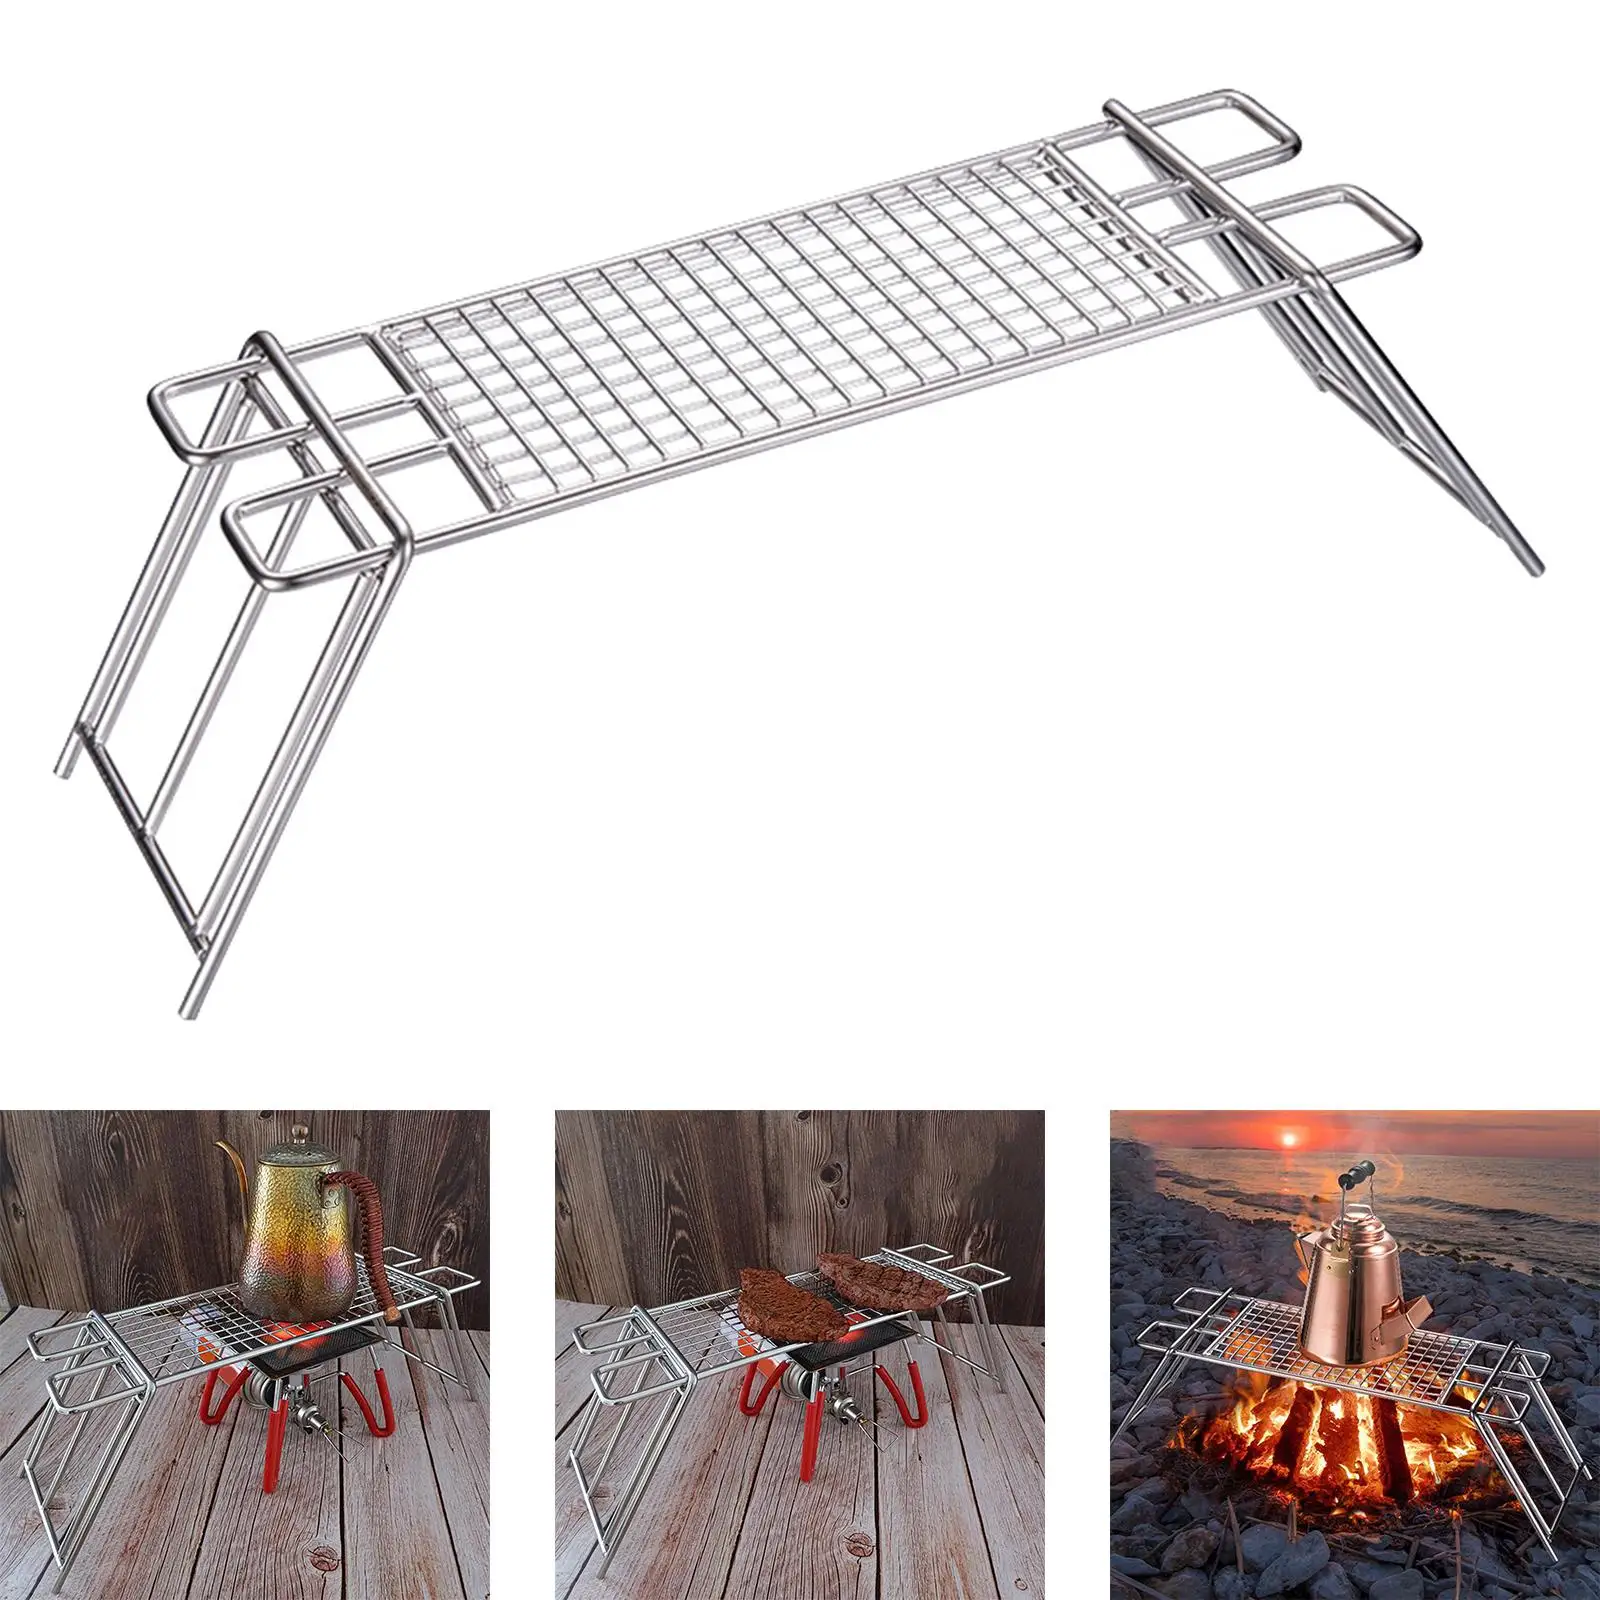 Barbecue Grill Pot Rack Foldable Leg Design Adjustable Height Cookware BBQ Net Mesh Rack for Hiking Picnics Traveling Fishing